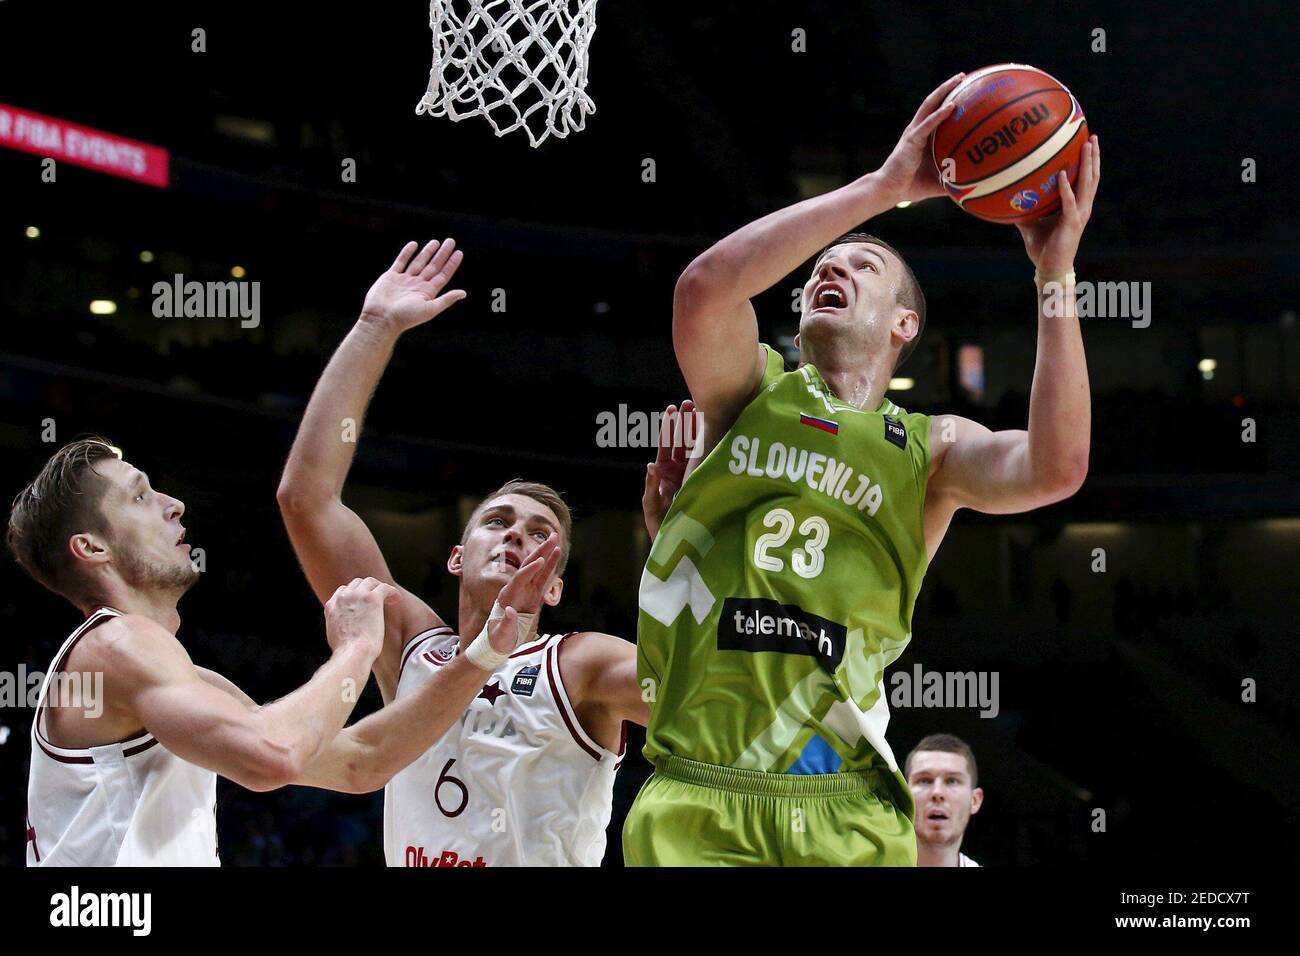 Slovenia's Alen Omic (23) goes for the basket against Latvia's Kaspars  Berzins (L) and Rolands Freimanis (6) during their 2015 EuroBasket 2015  round of 16 match at the Pierre Mauroy stadium in